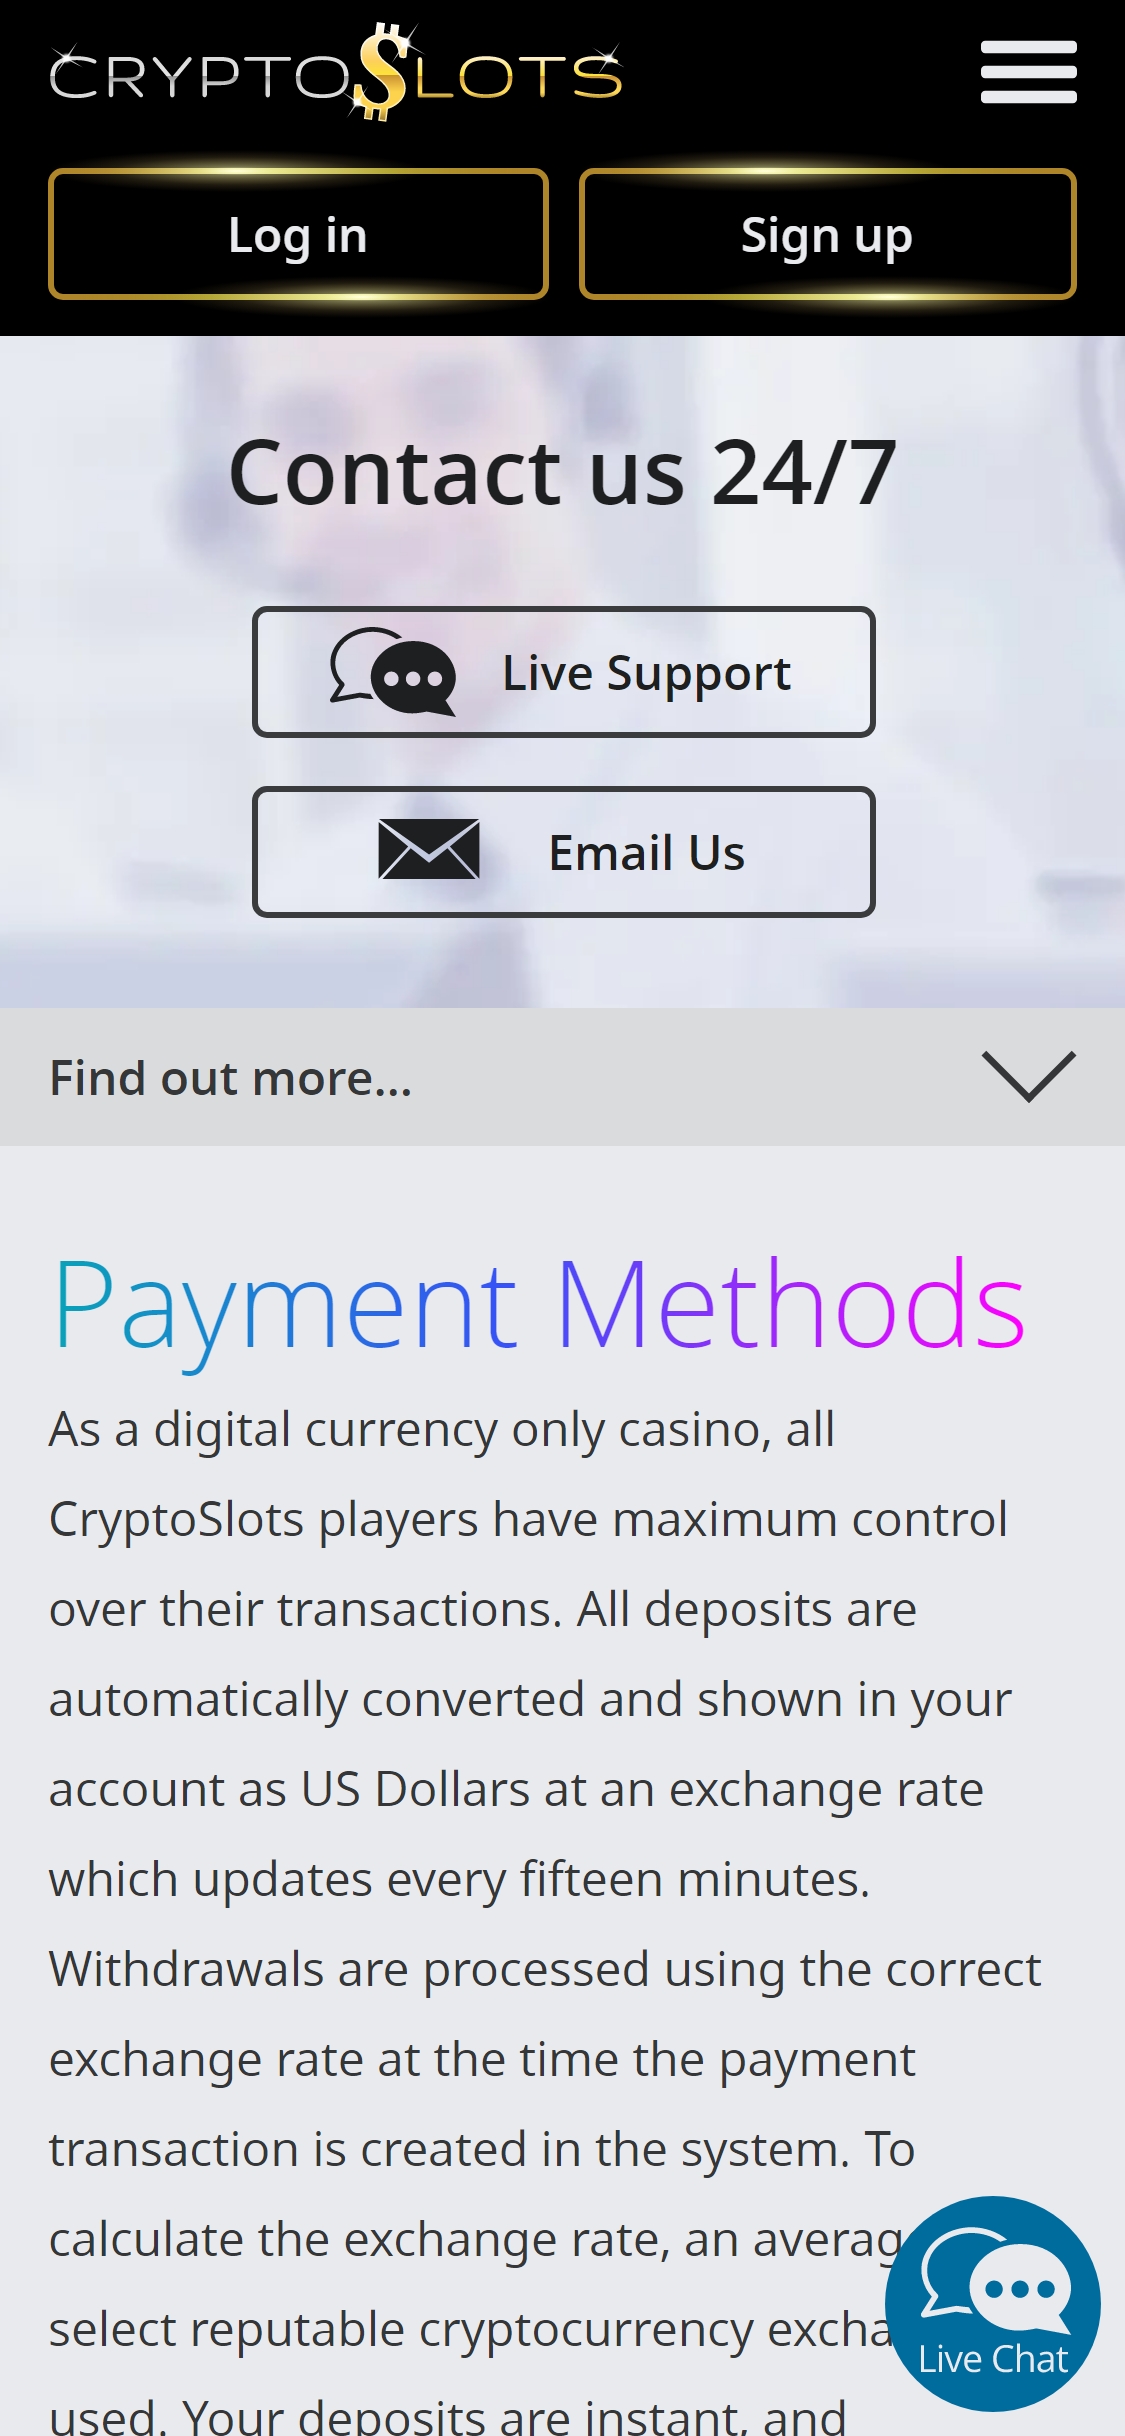 Crypto Slots Casino Mobile Payment Methods Review